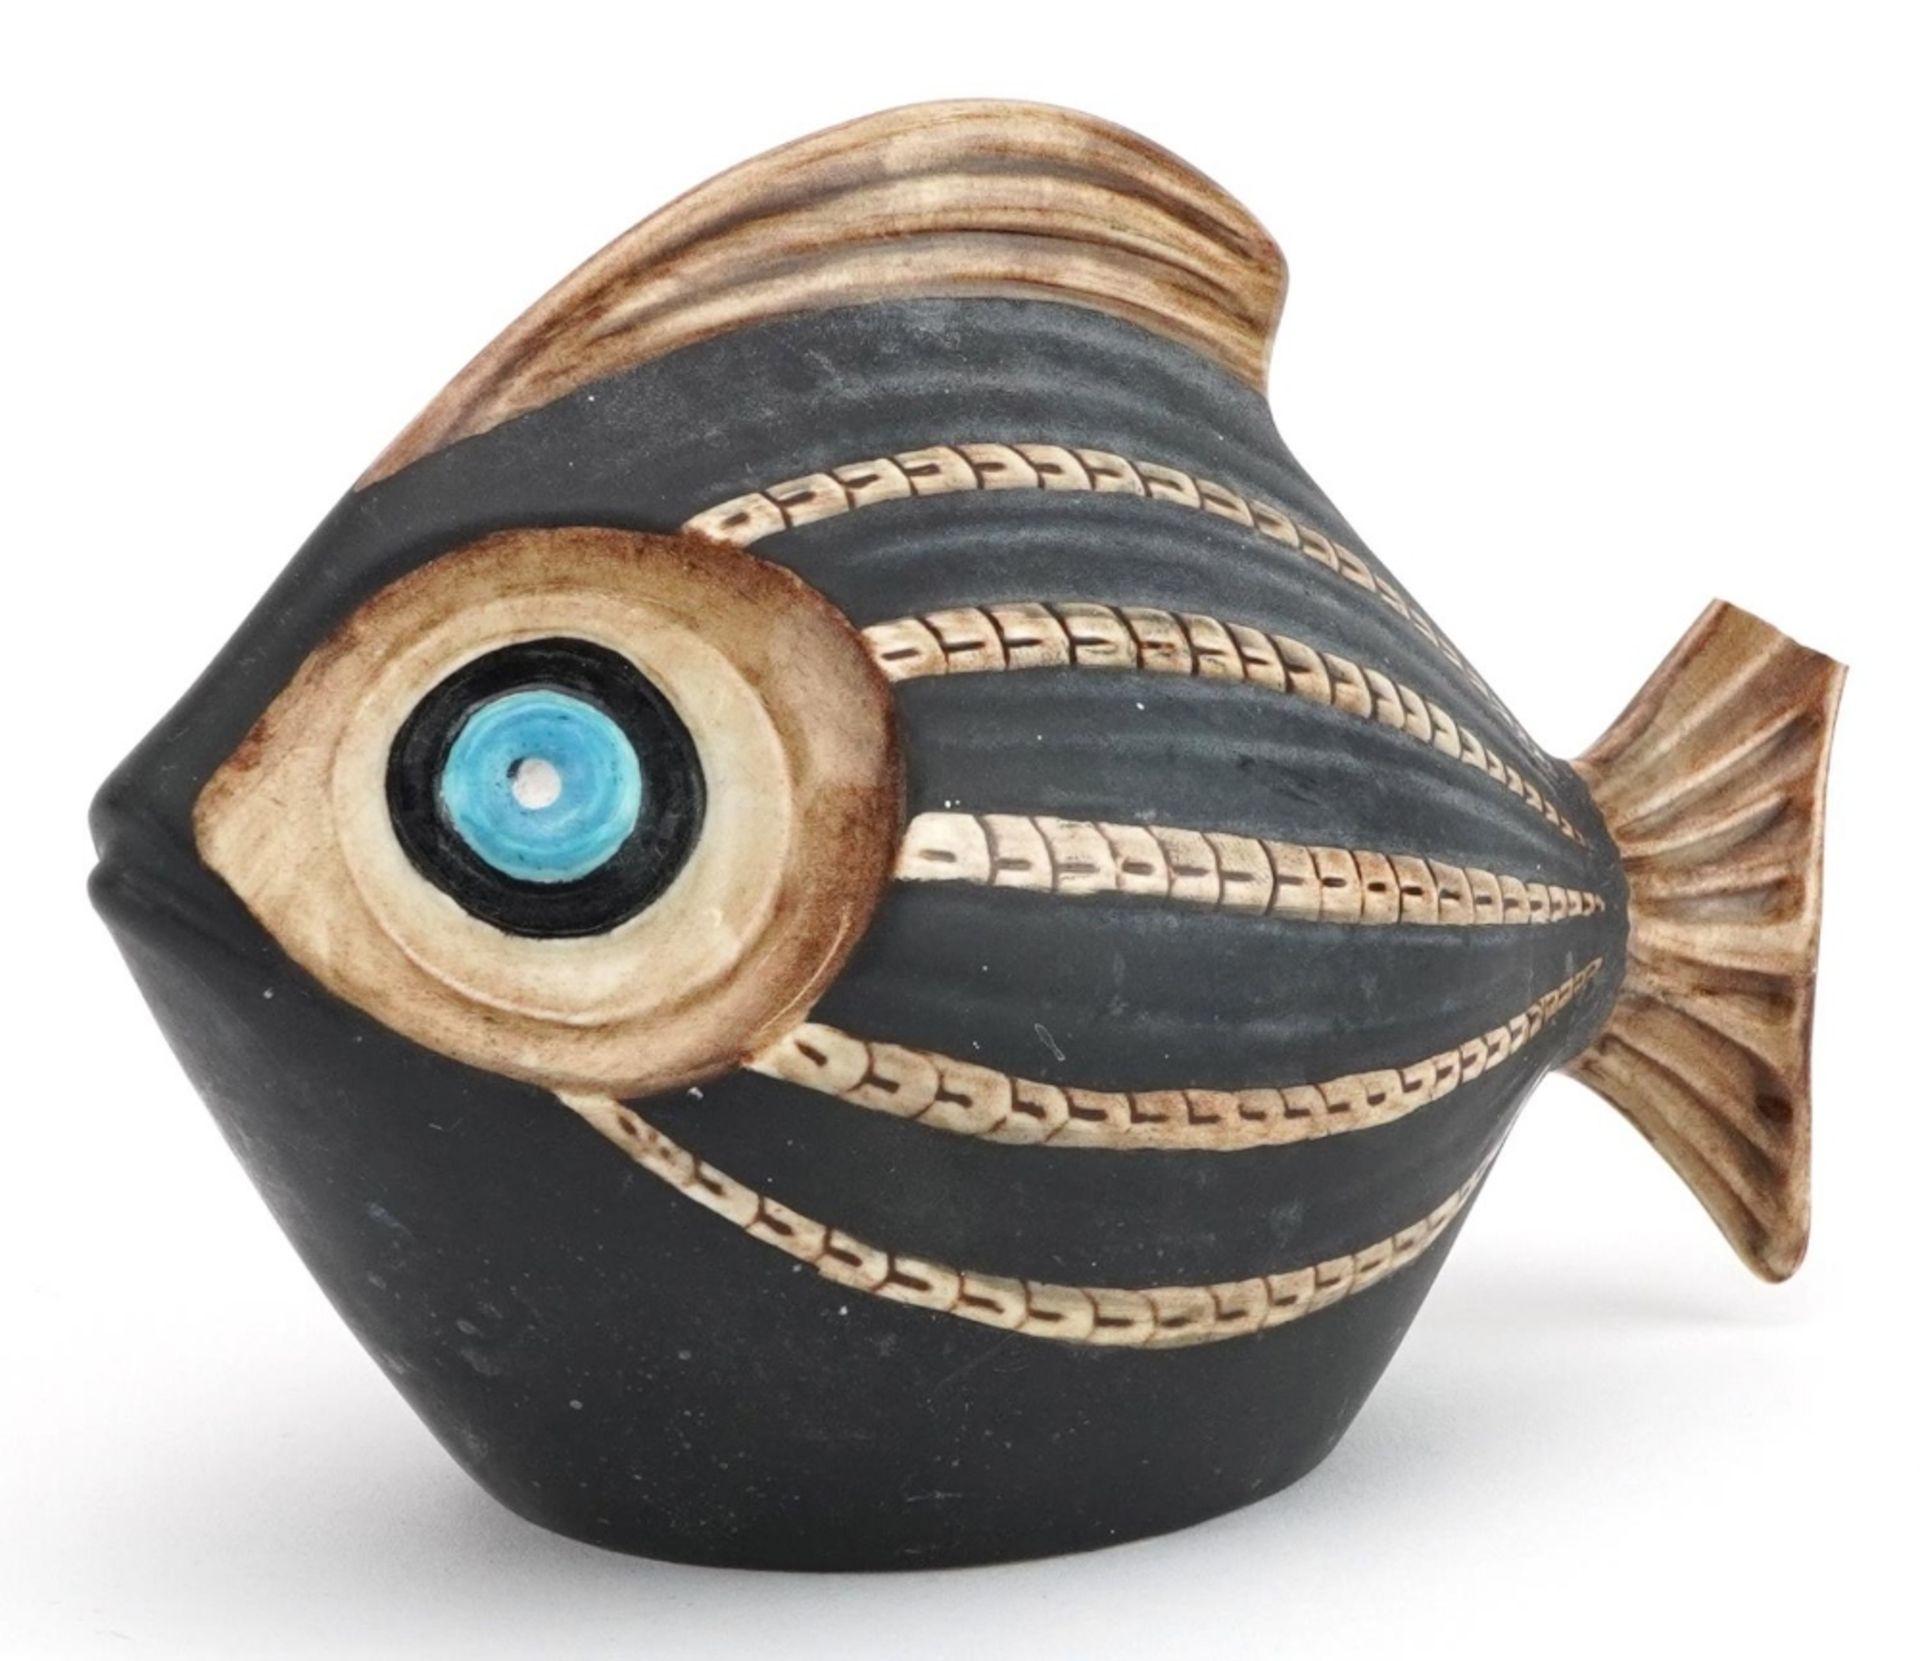 Beswick stylised fish numbered 2254, paper label to the base, 17.5cm in length : For further